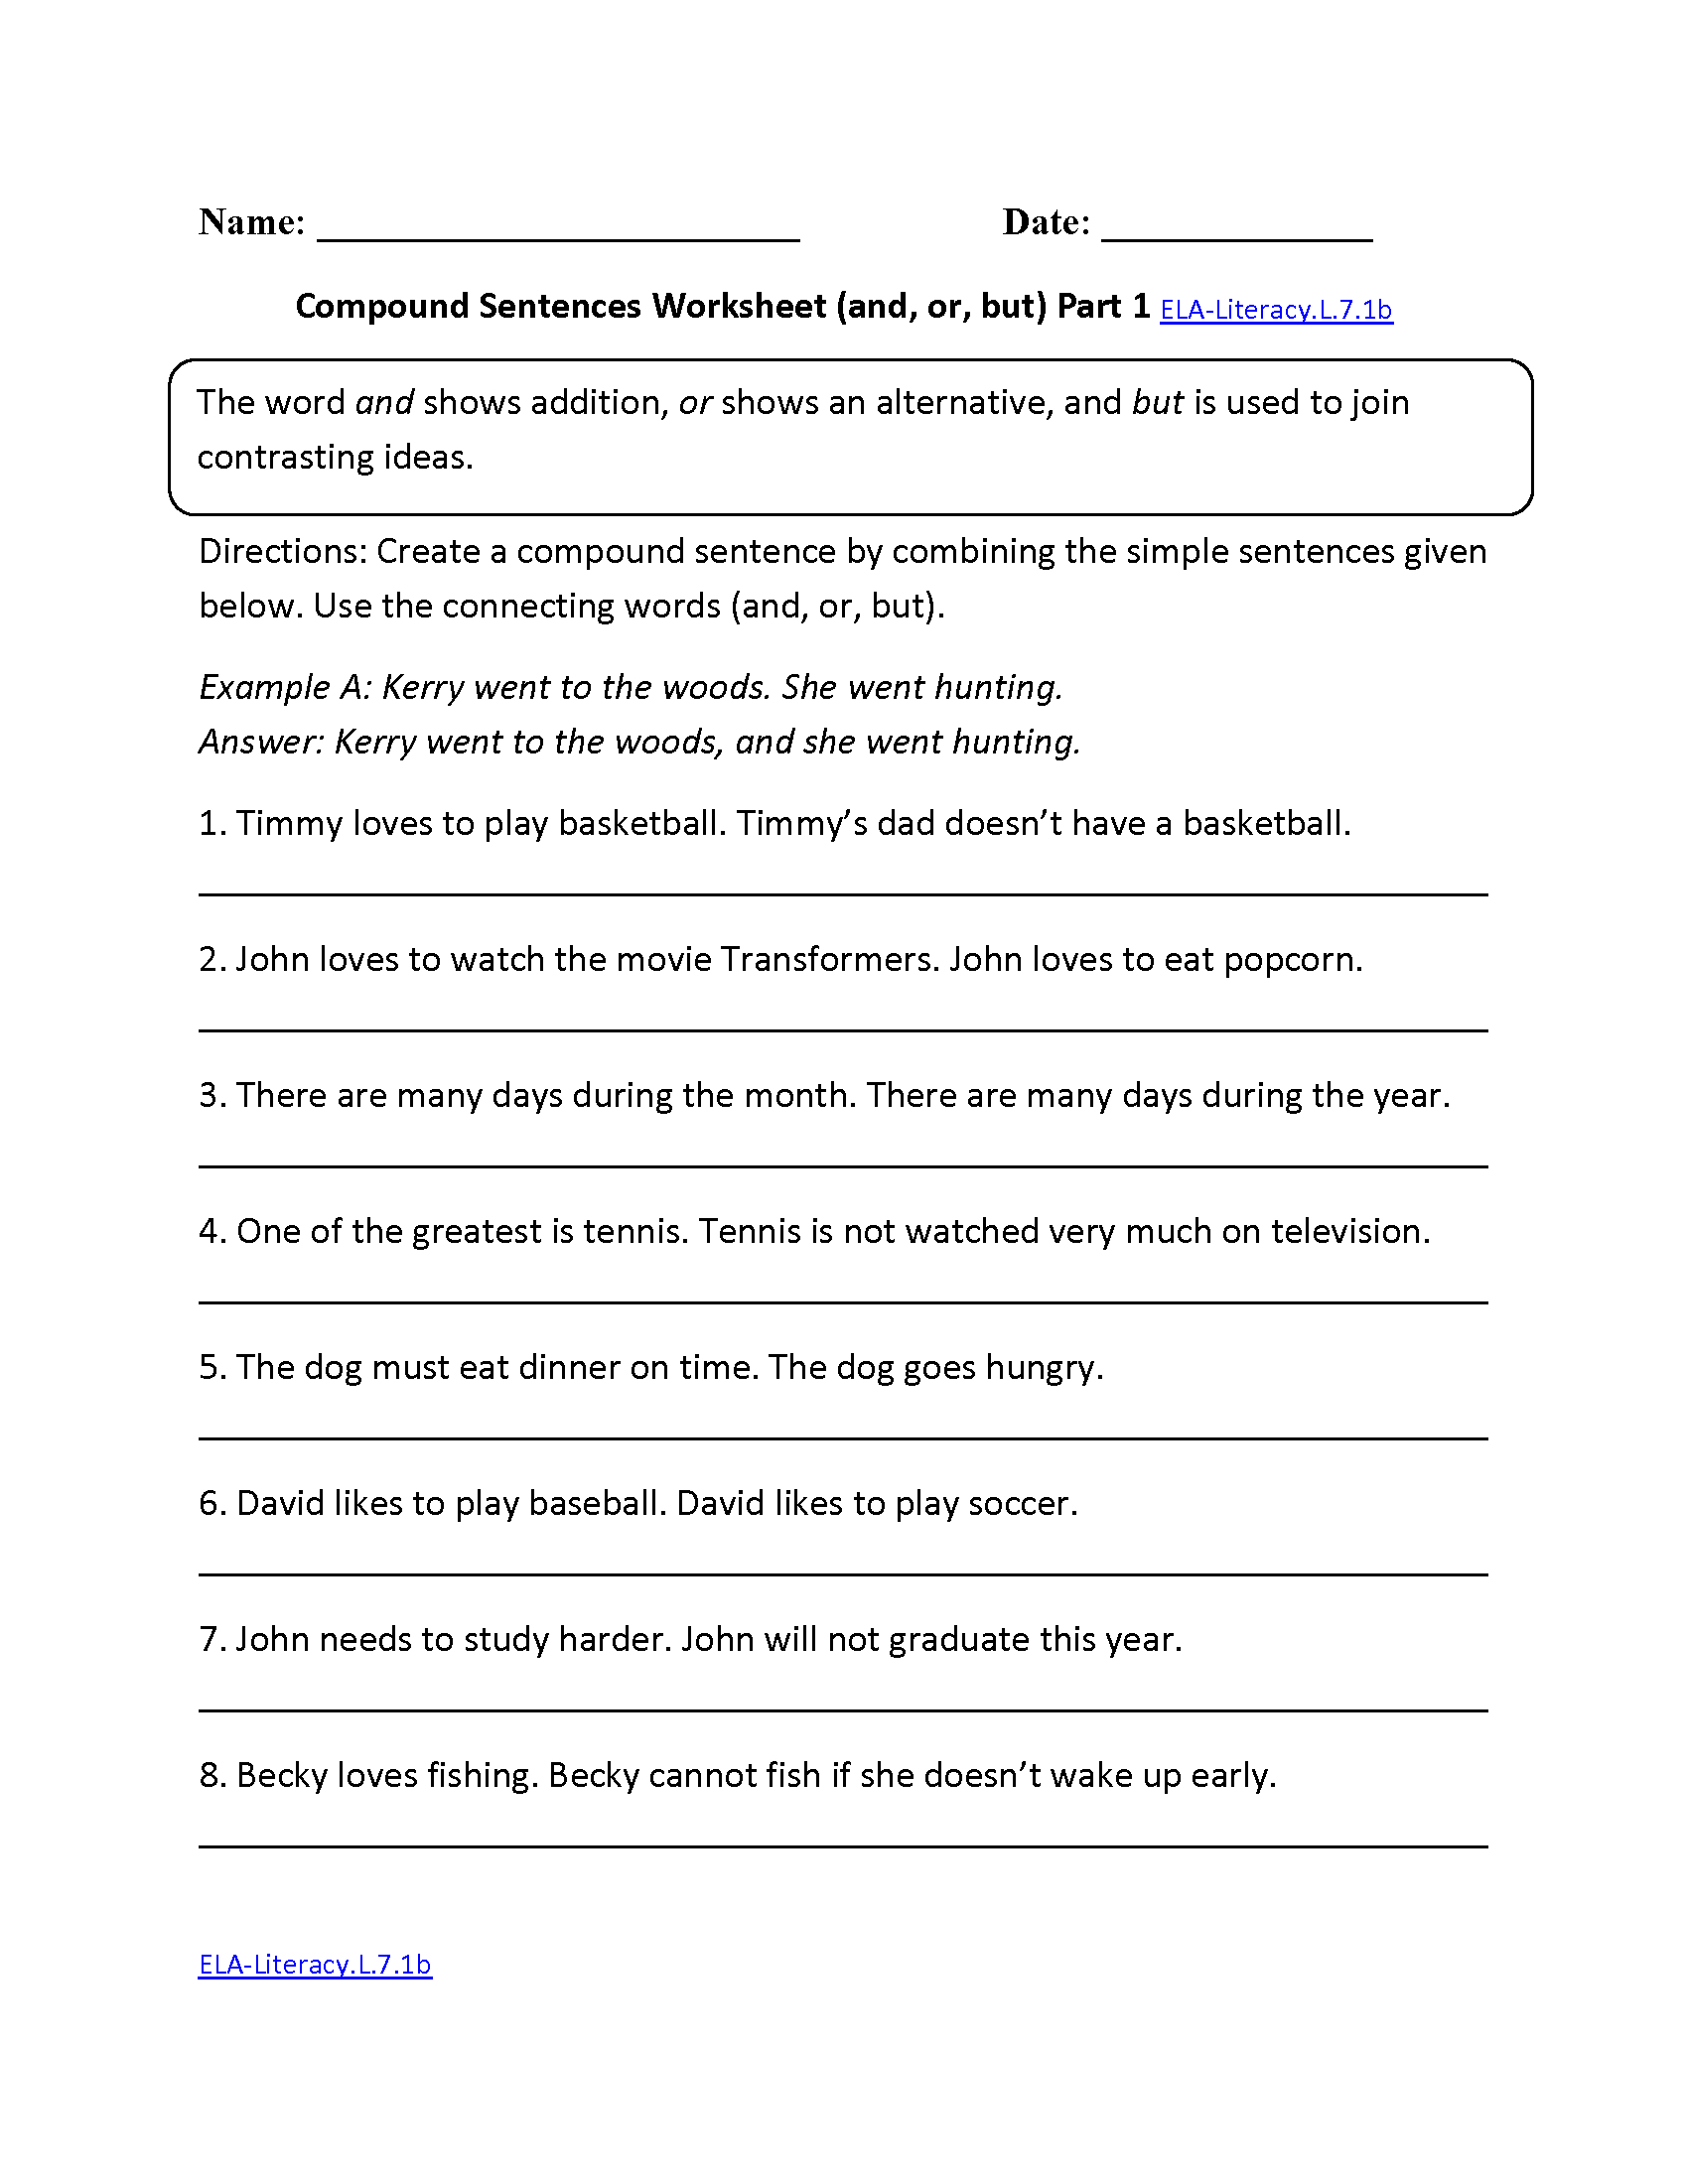 Practicing Object Pronouns Worksheet Ideas For The House Pronoun Grade 7 English